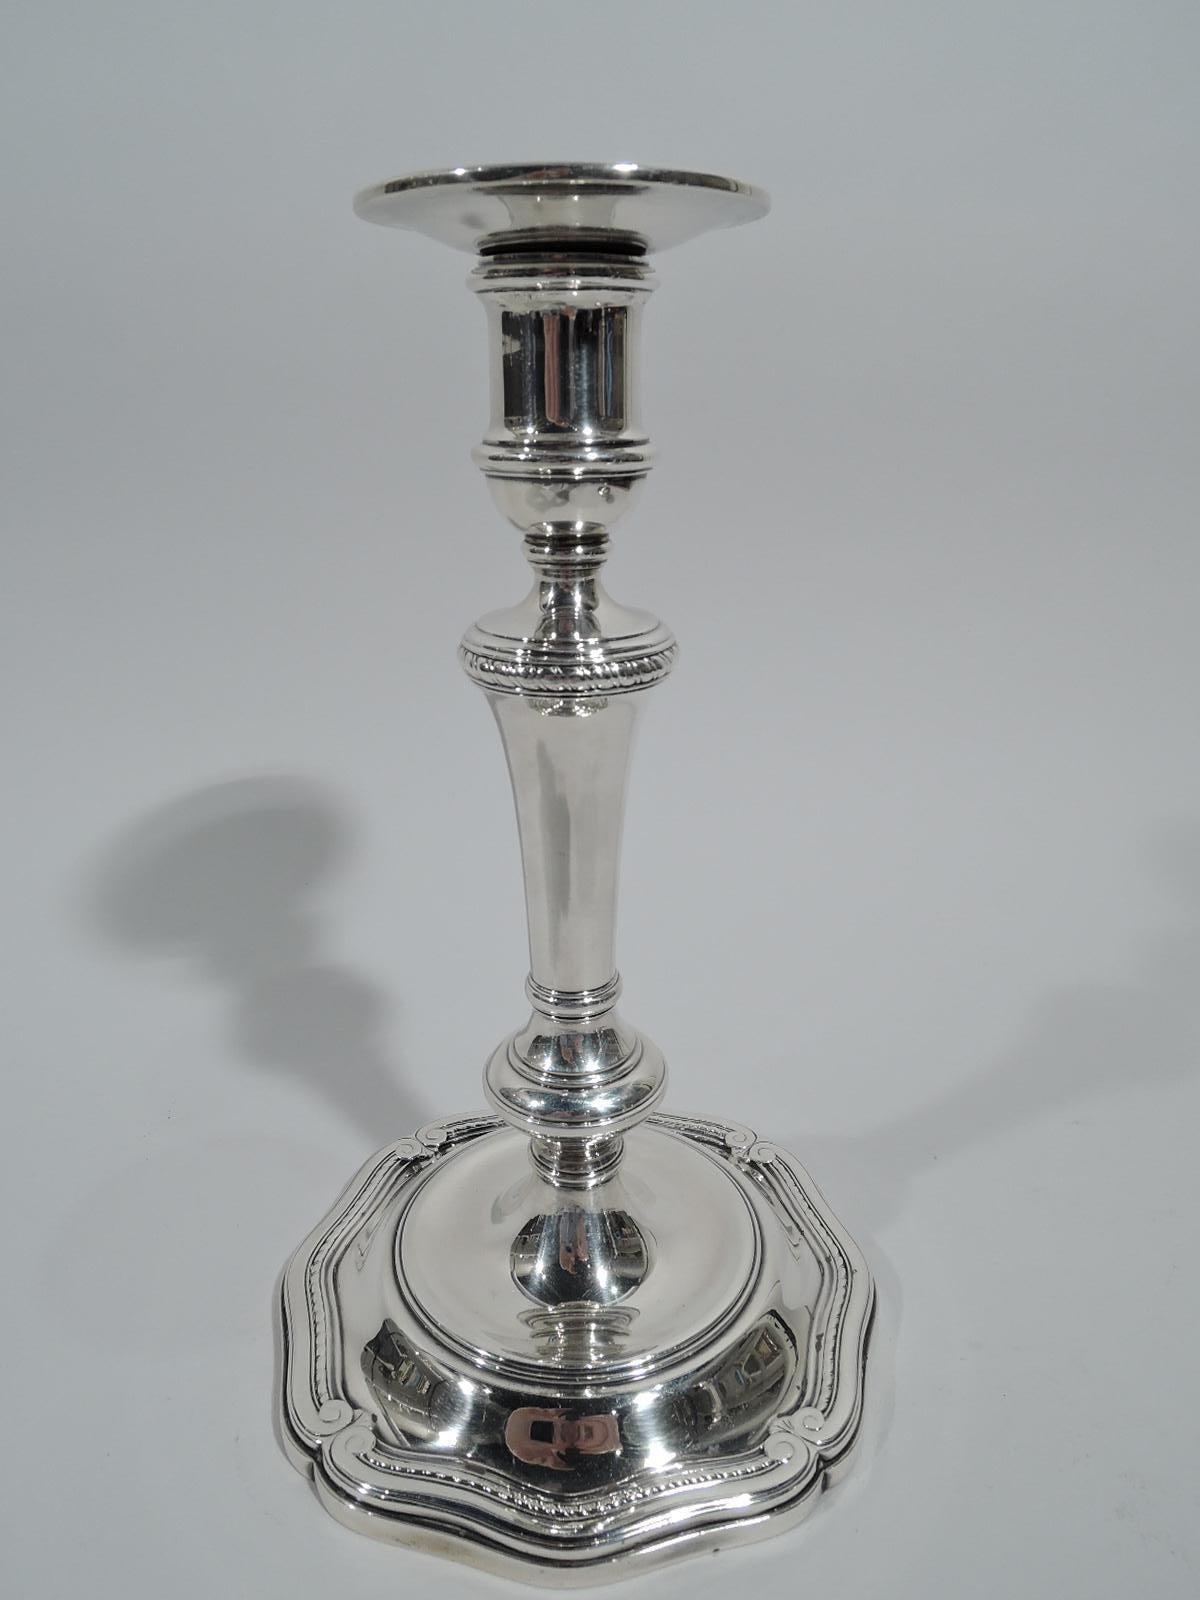 Pair of Edwardian Classical sterling silver candlesticks. Made by Tiffany & Co. in New York, ca 1916. Spool socket on knopped and tapering shaft flowing into round base with concave well. Base rim has long and gentle scrolls with Classical volute